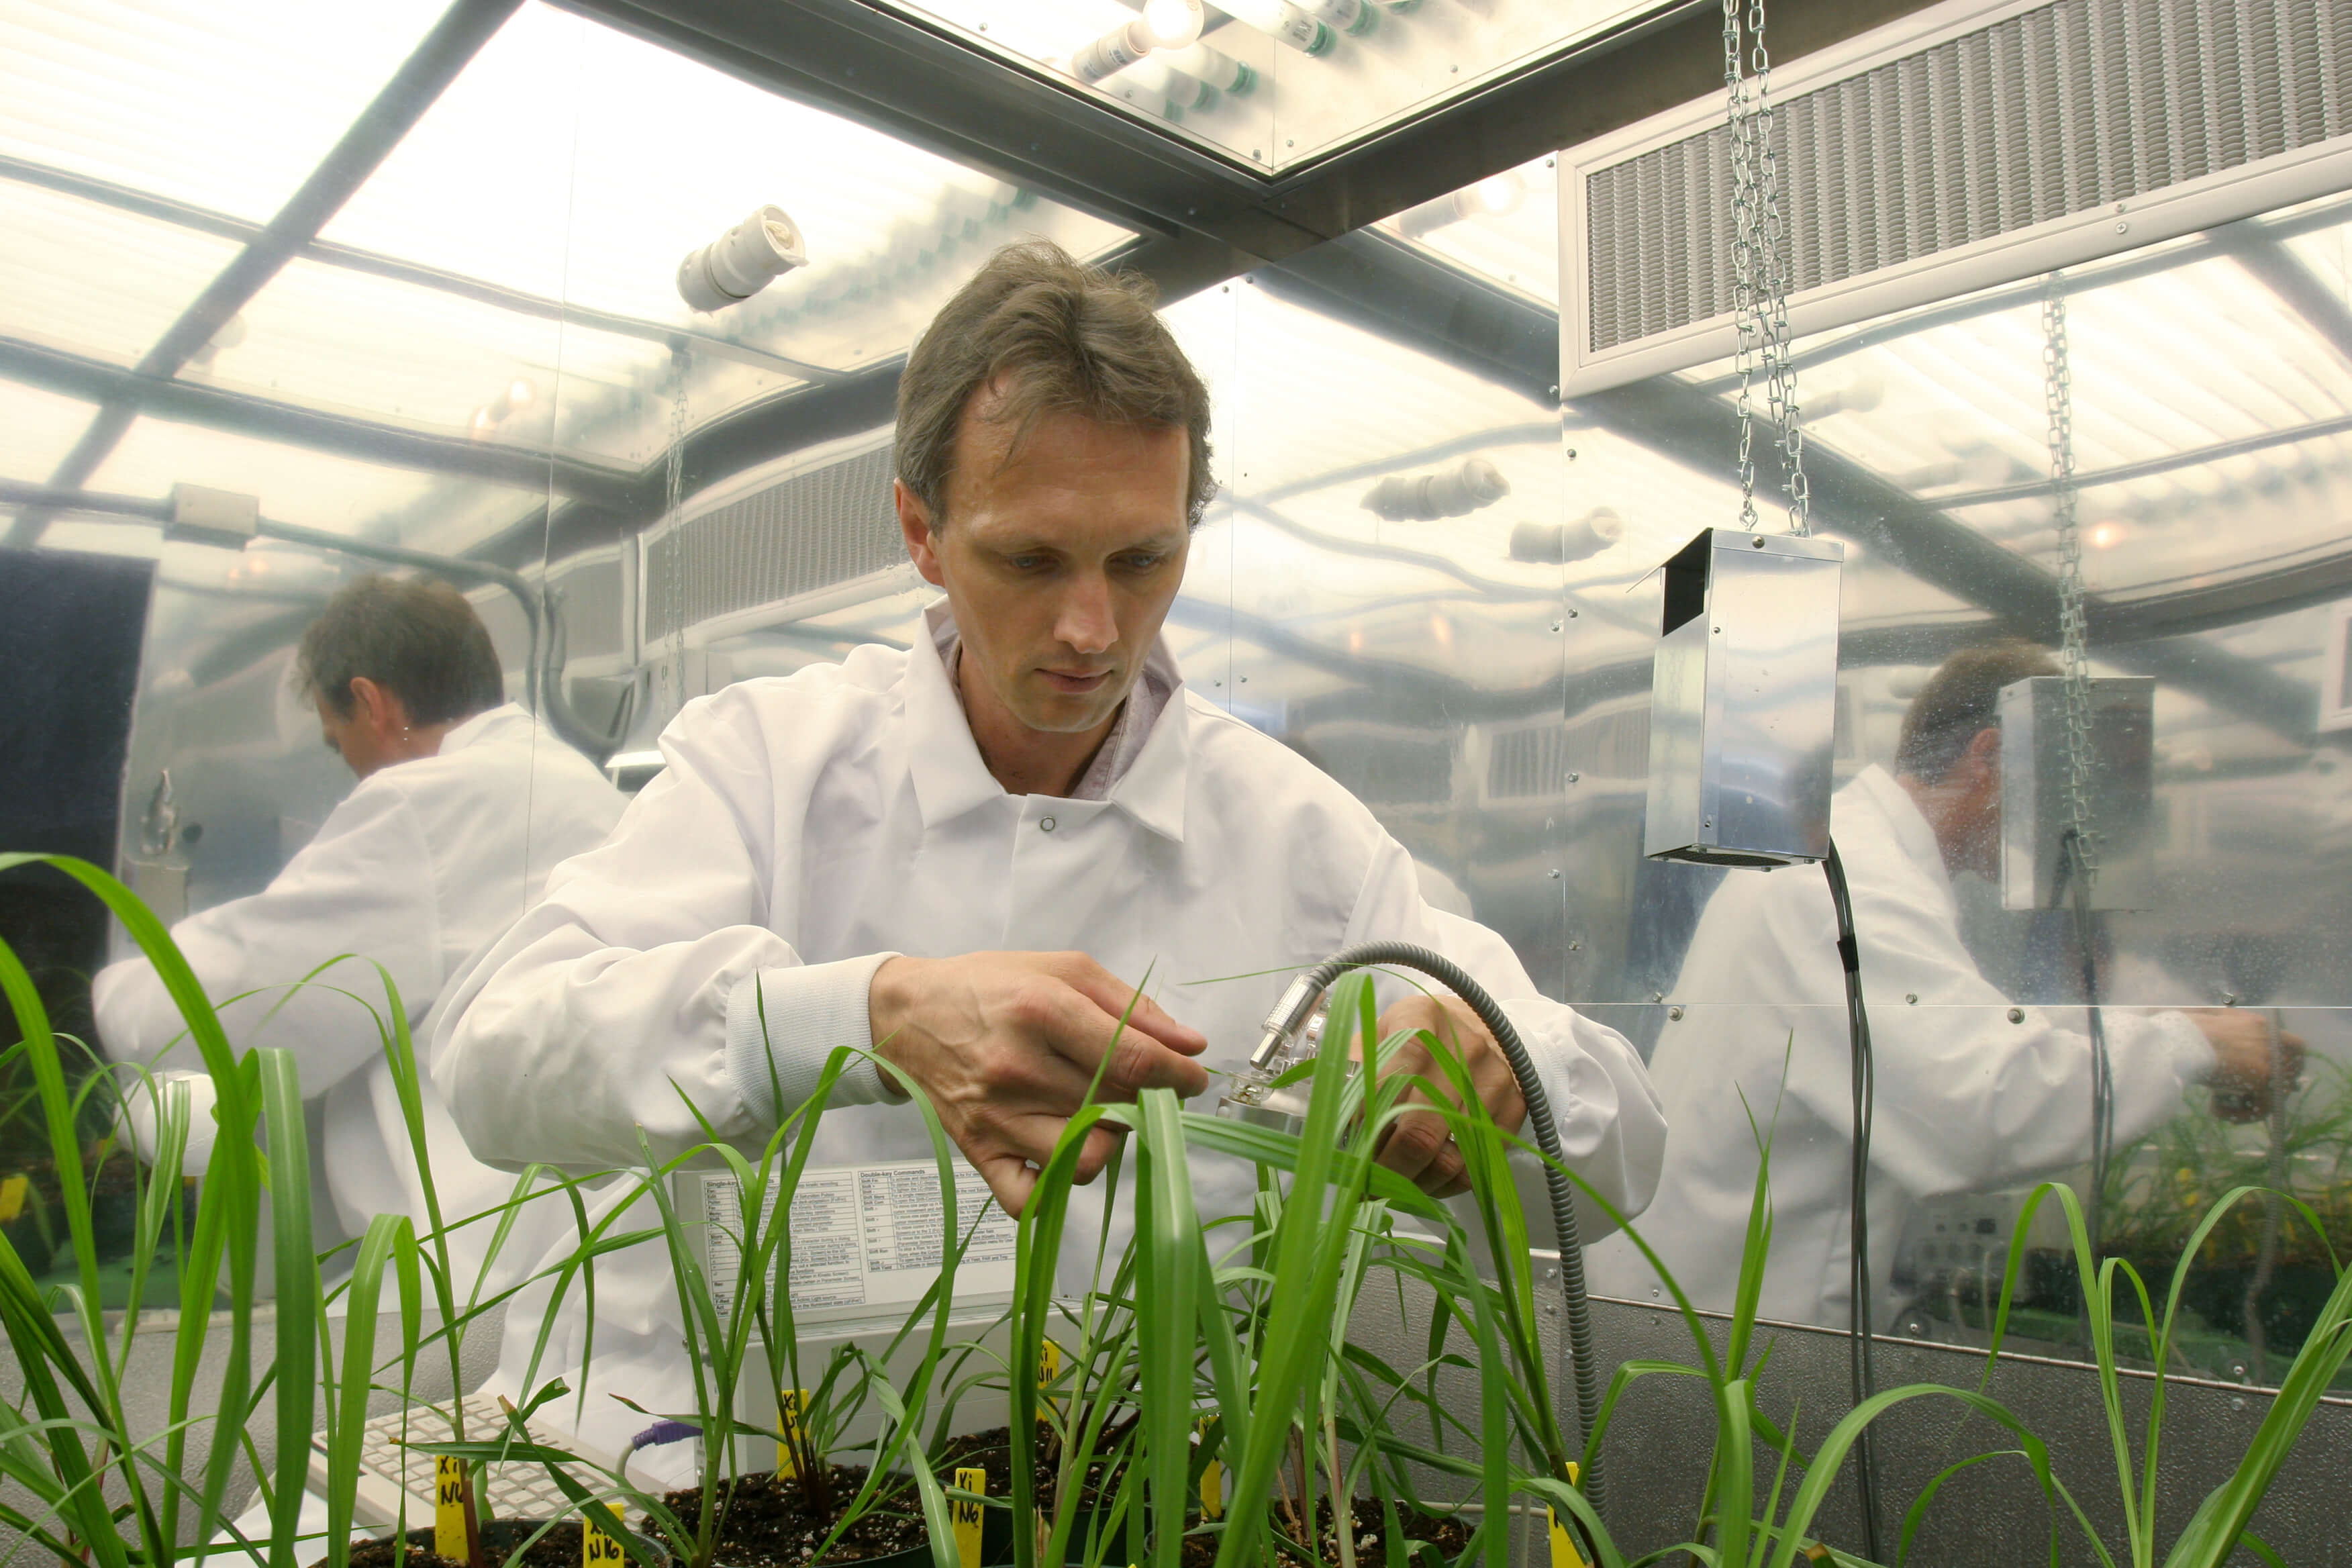 Fredy Altpeter in a lab coat, working on plants